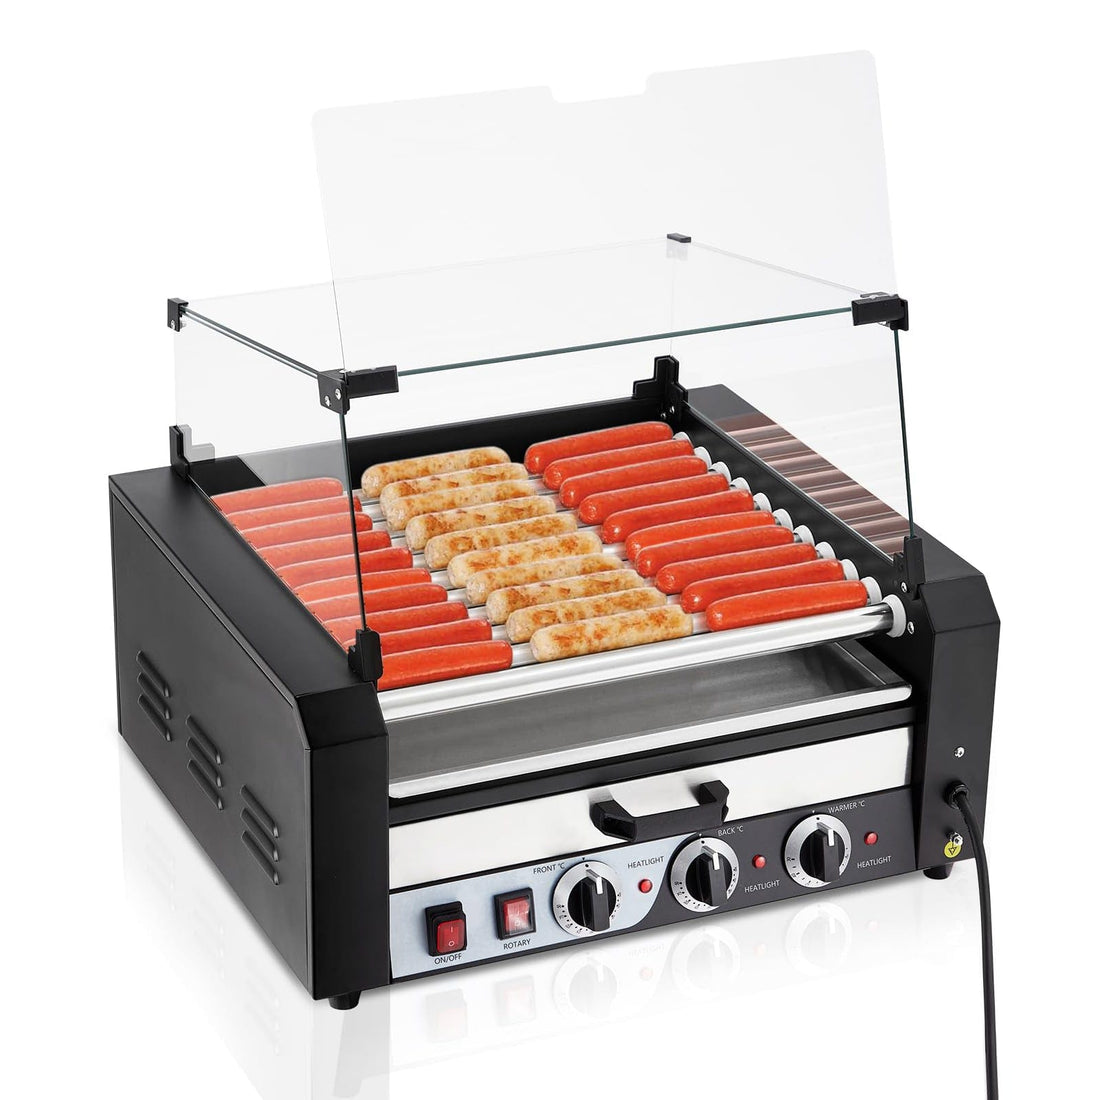 GARVEE Hot Dog Roller 11 Rollers 30 Hot Dogs Capacity 1850W Stainless Sausage Grill Cooker Machine